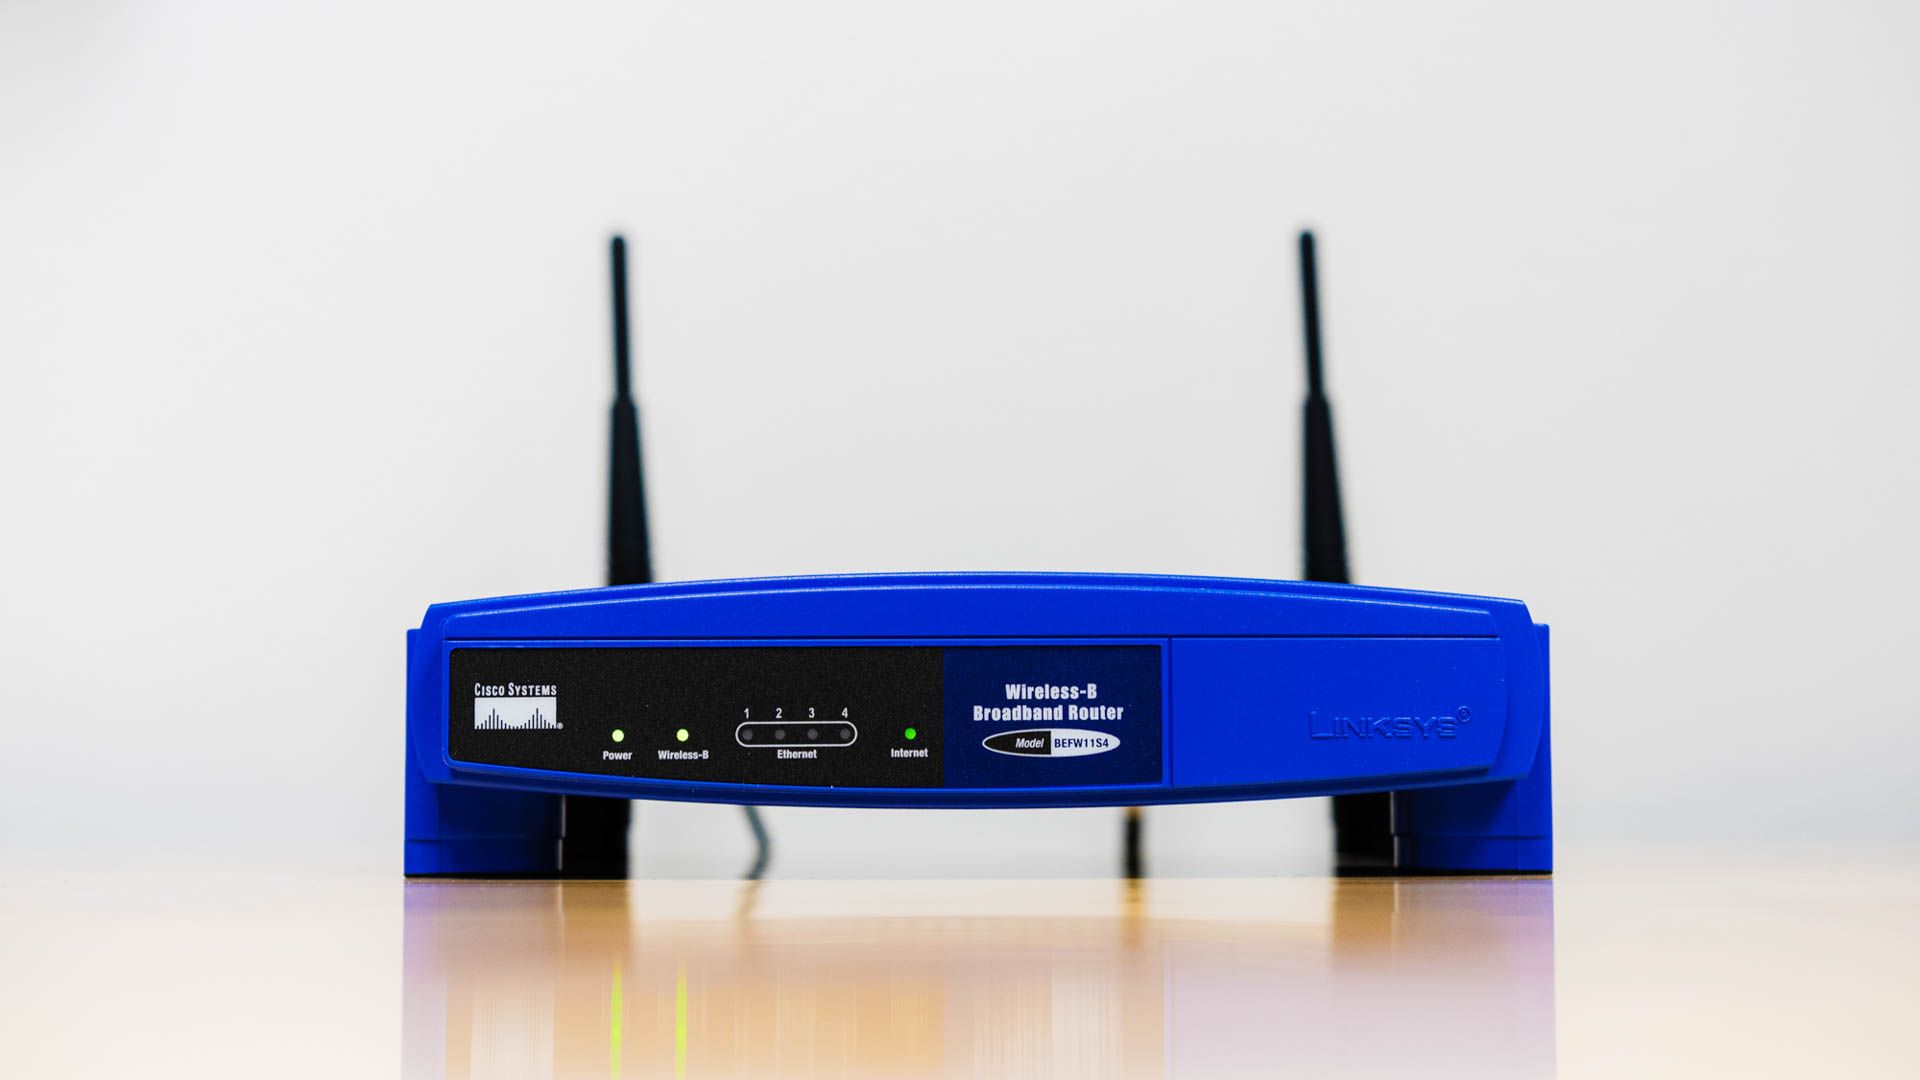 Dated Wireless B Broadband Router by Linksys